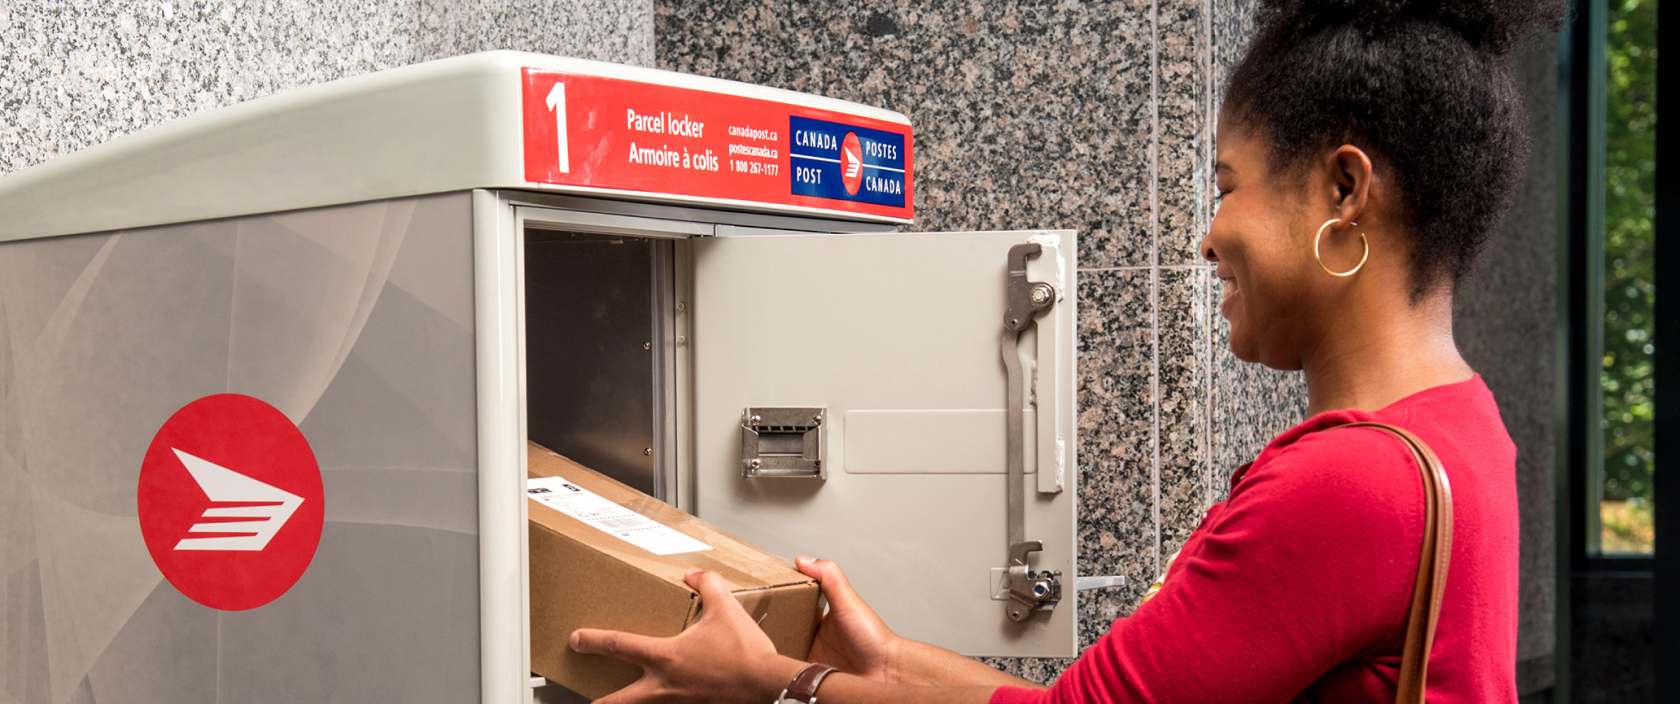 A woman retrieves her package from the Canada Post parcel locker in her apartment building’s mailroom.